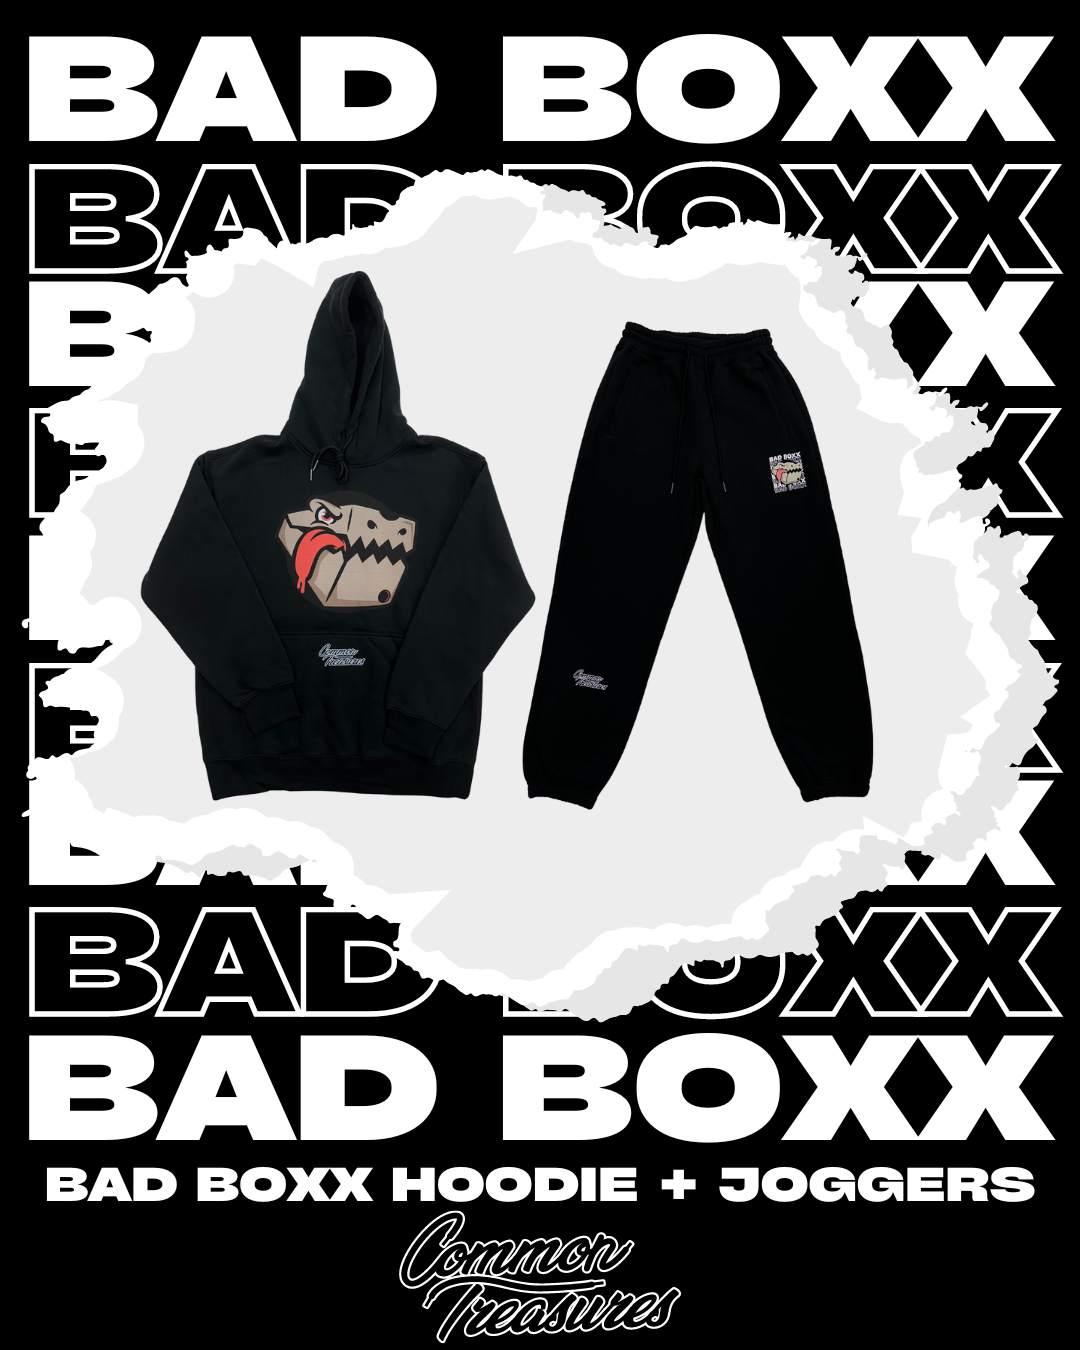 Bad Boxx (Hoodie + Joggers) Collection